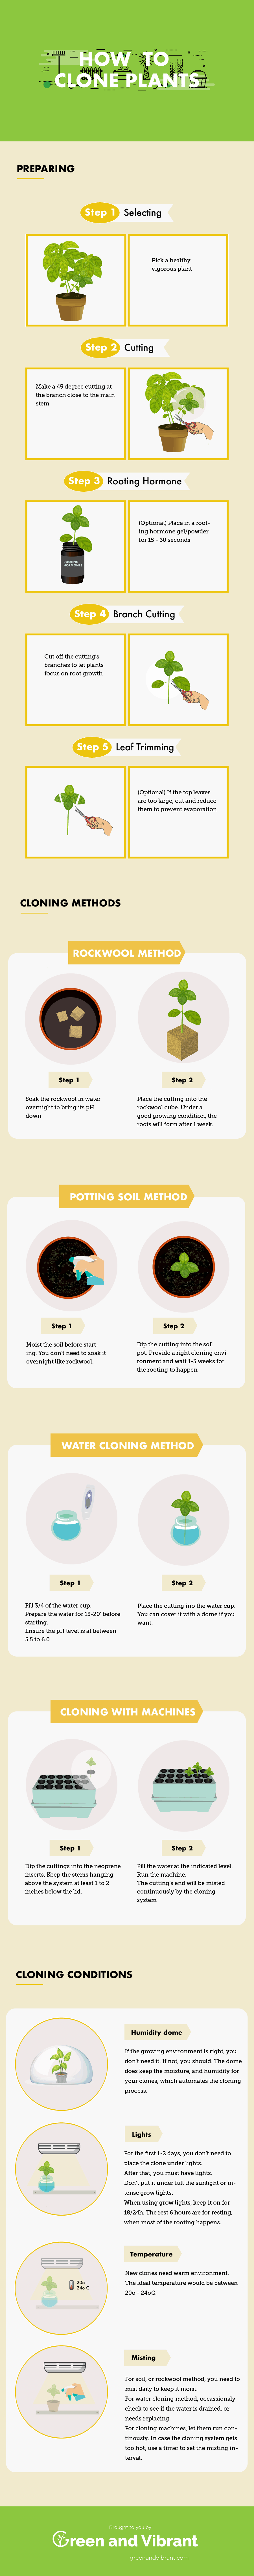 how to clone plants infographic